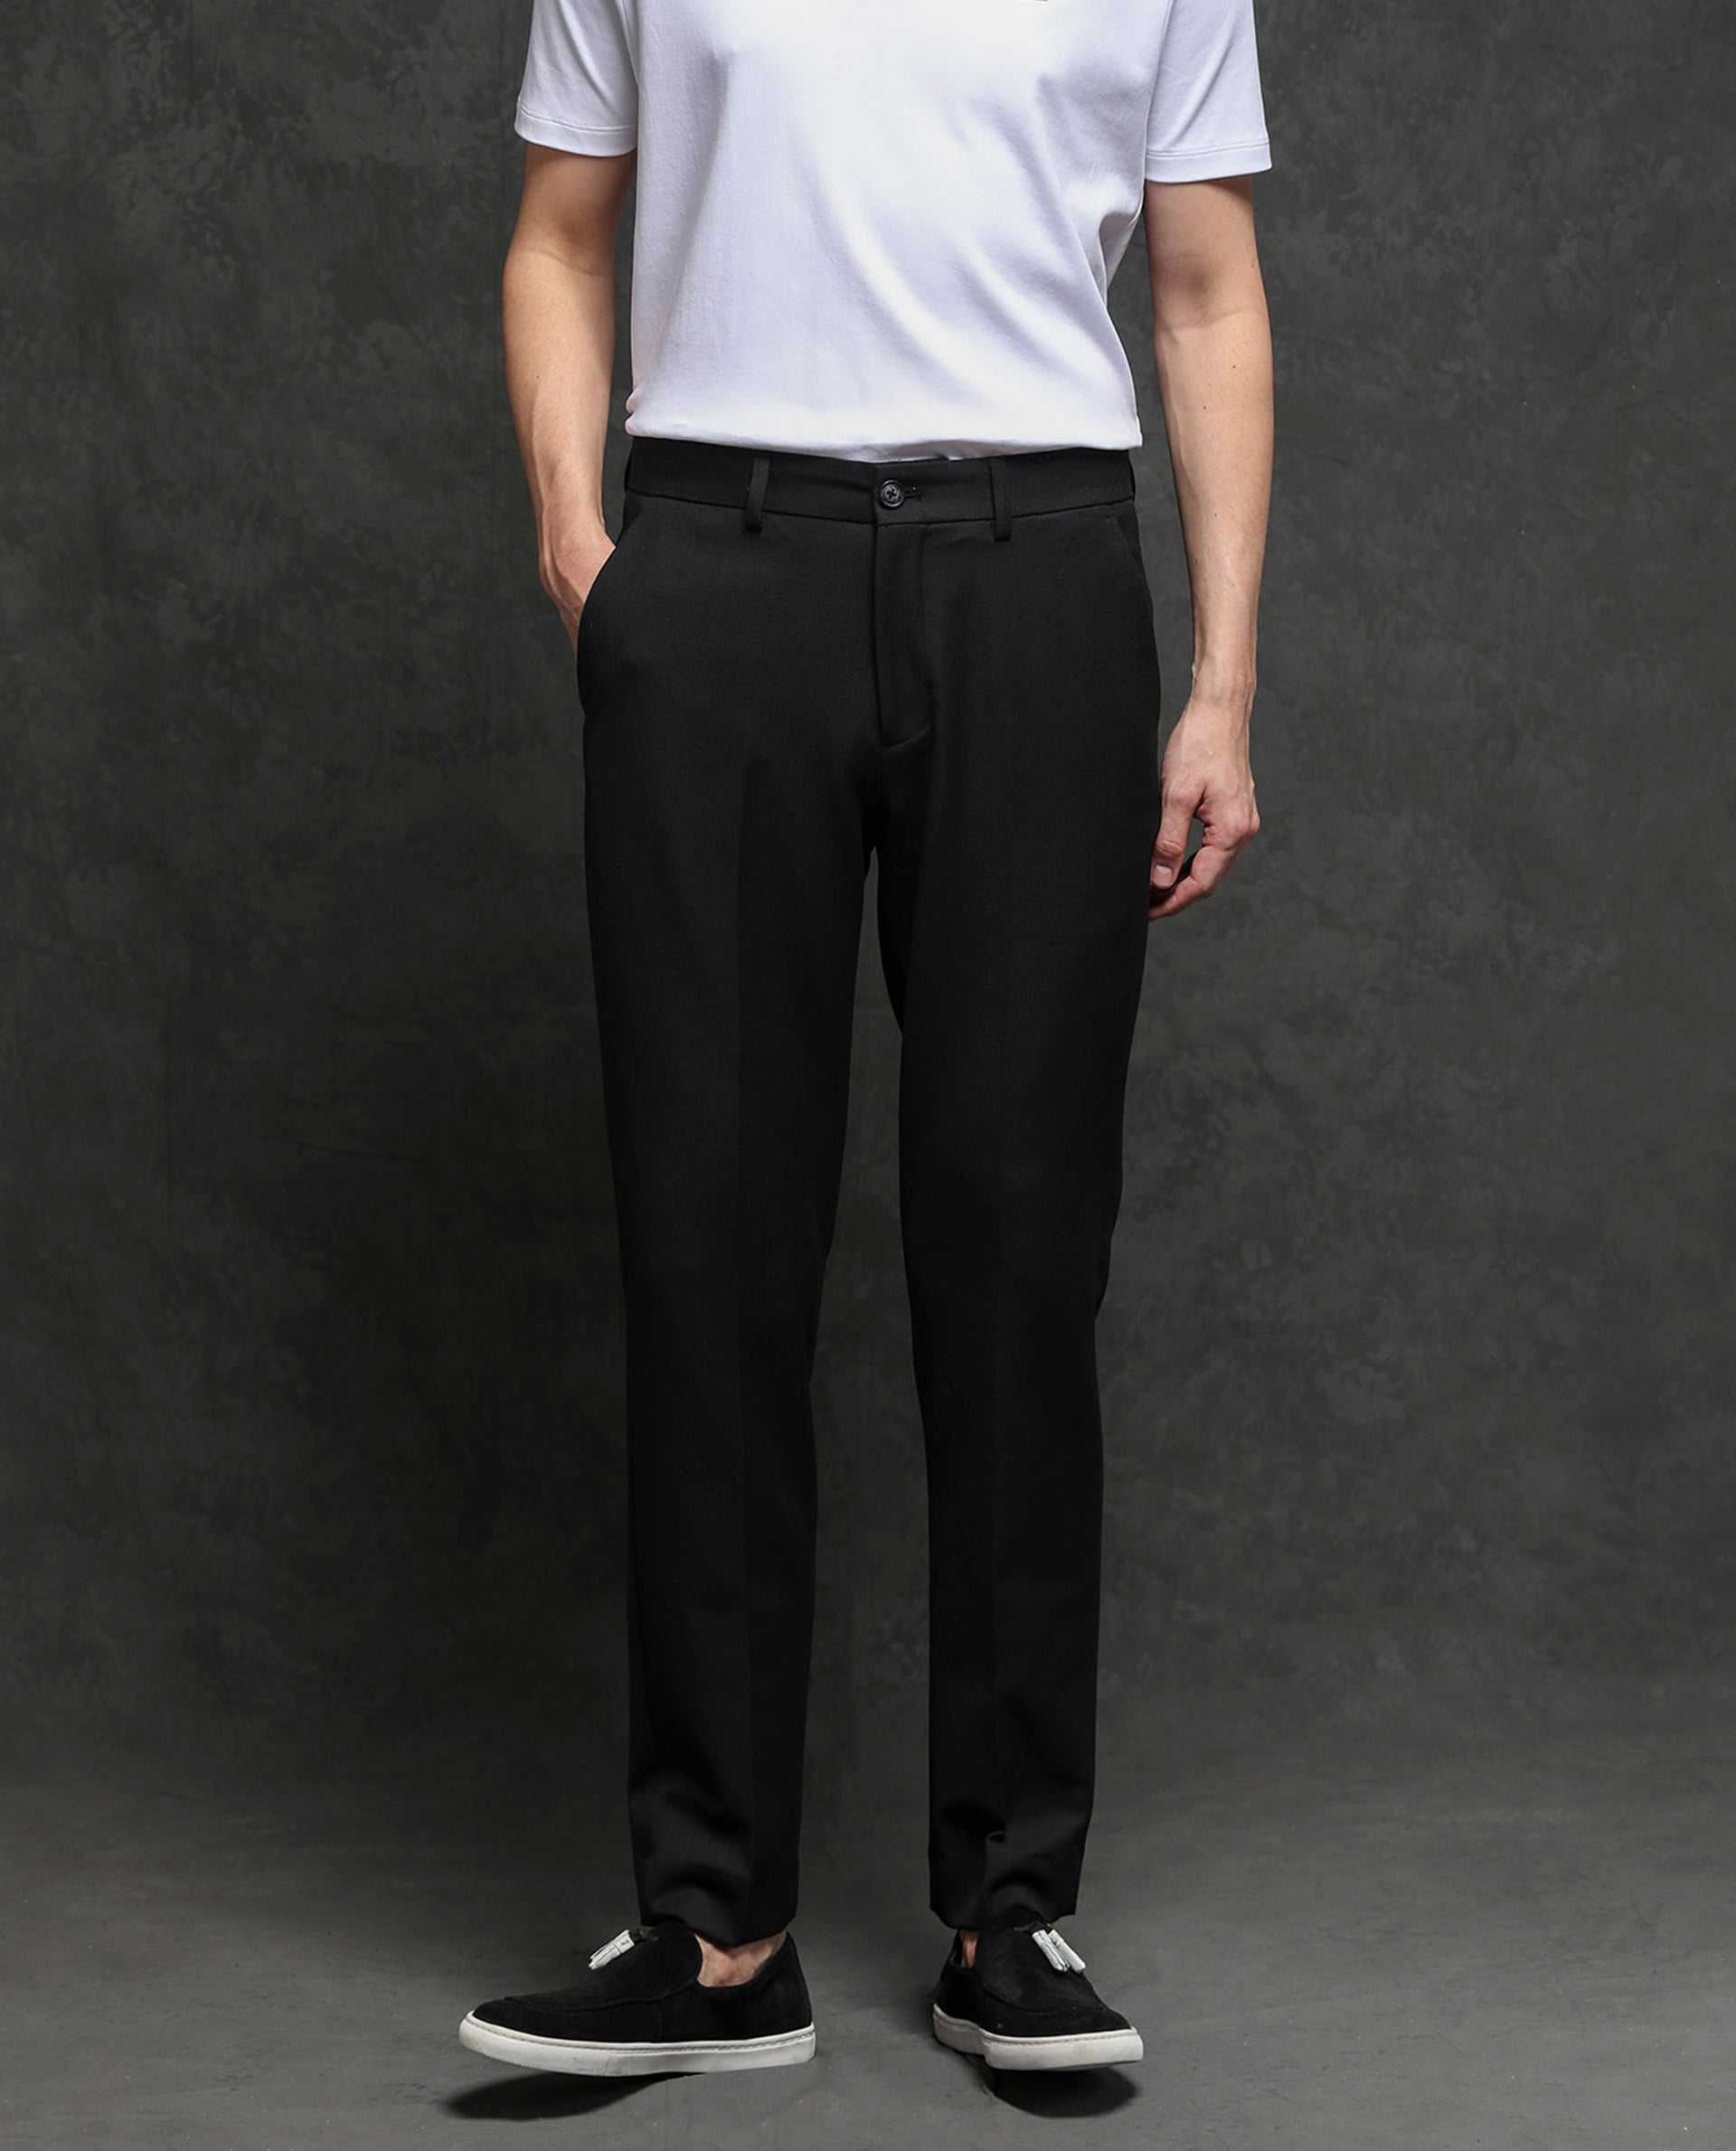 Group Made to Order Trousers—Dugdale Cavalry Twill at Spier & Mackay –  Menswear Musings